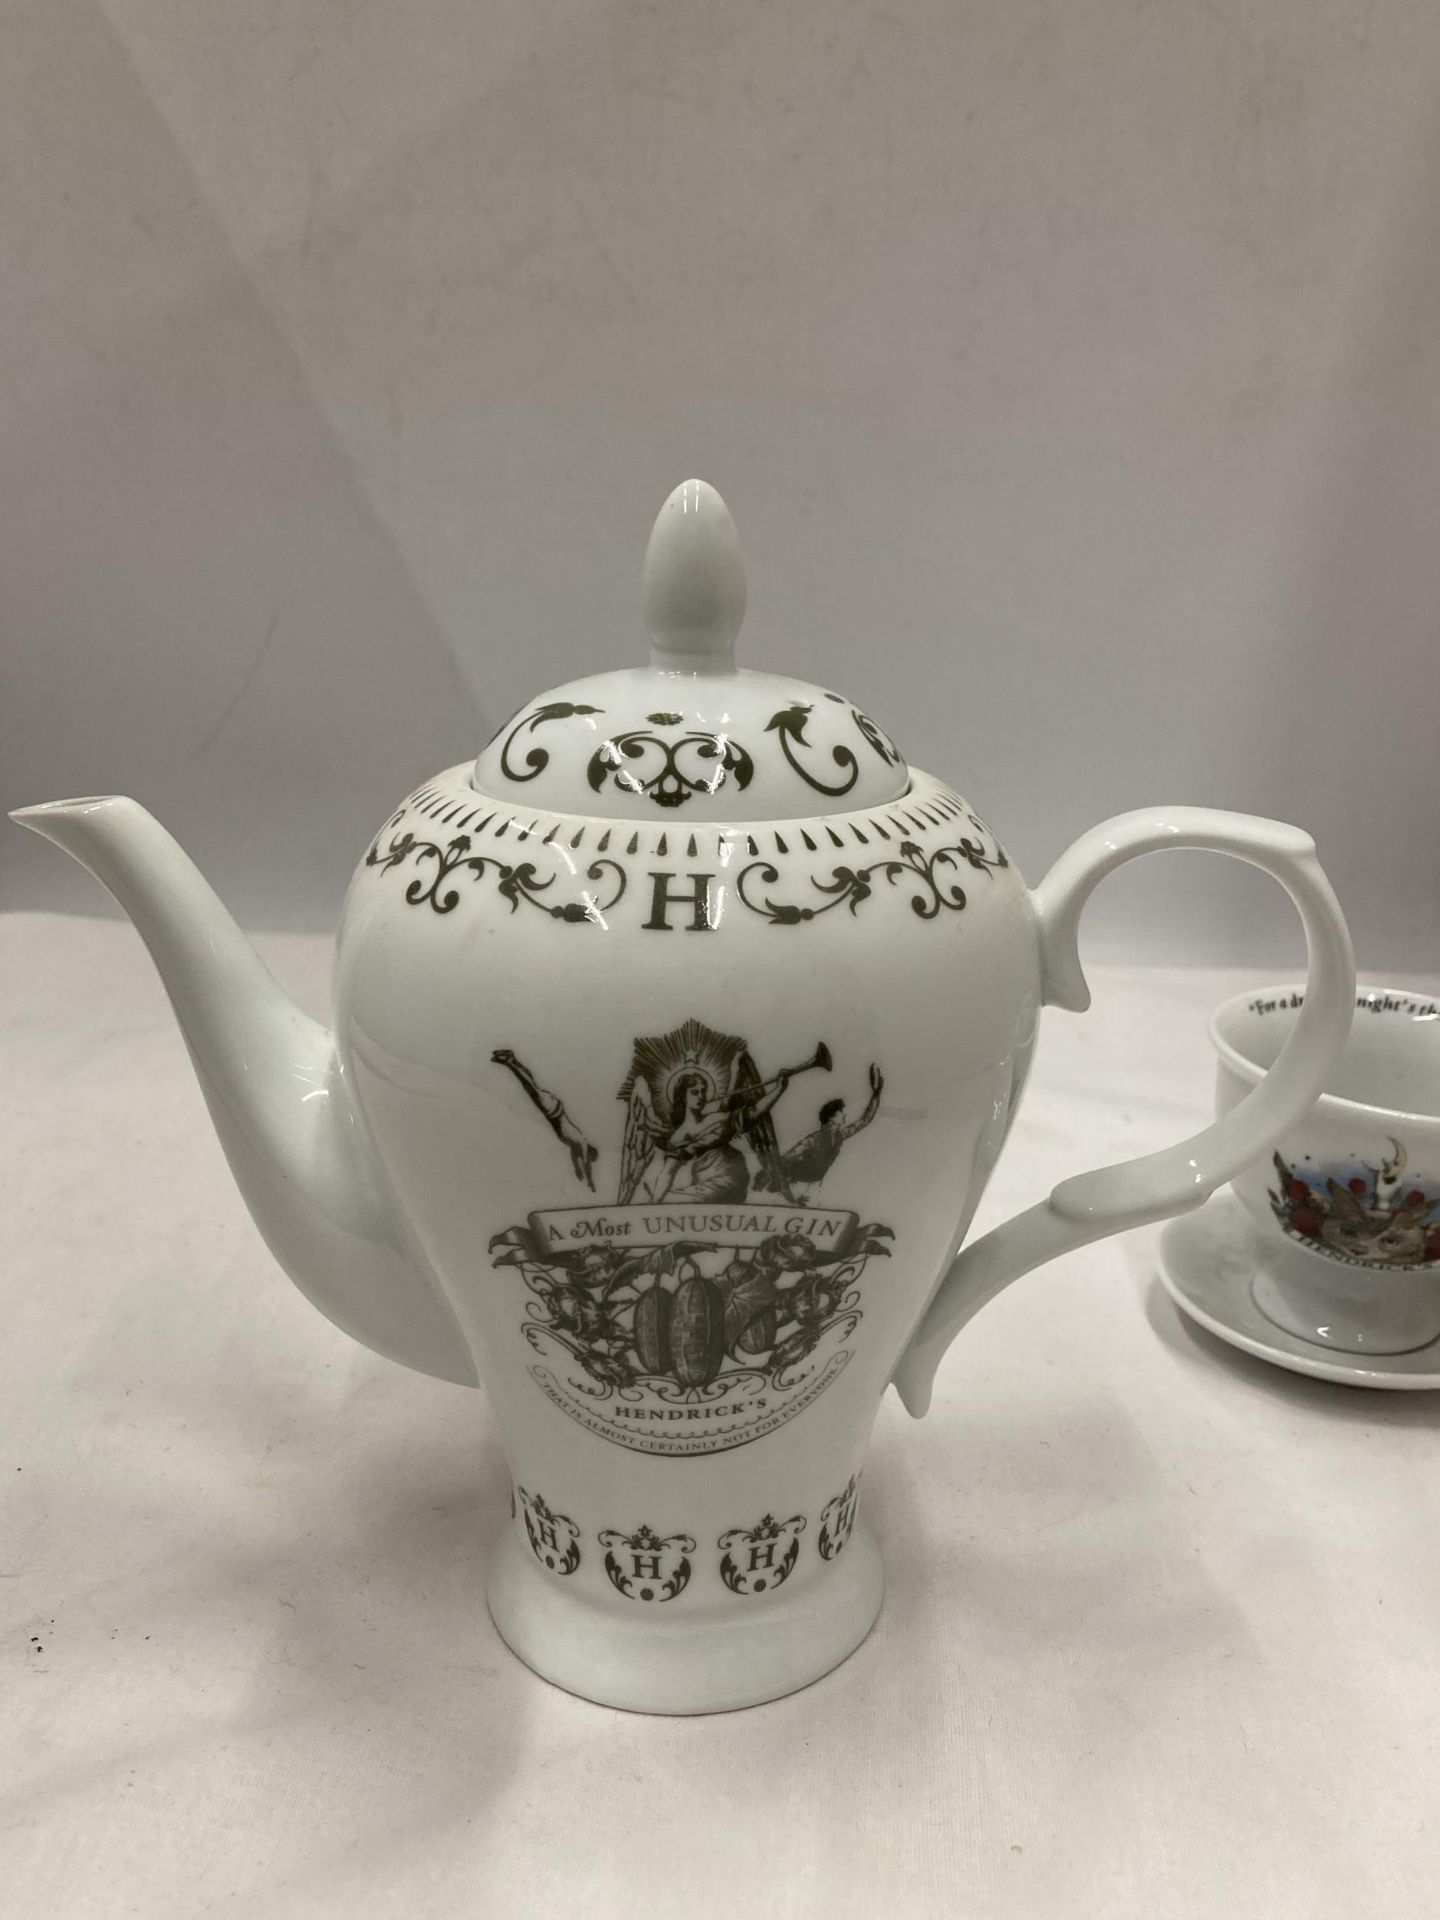 A HENDRICKS TEAPOT AND CUP AND SAUCER - Image 6 of 7